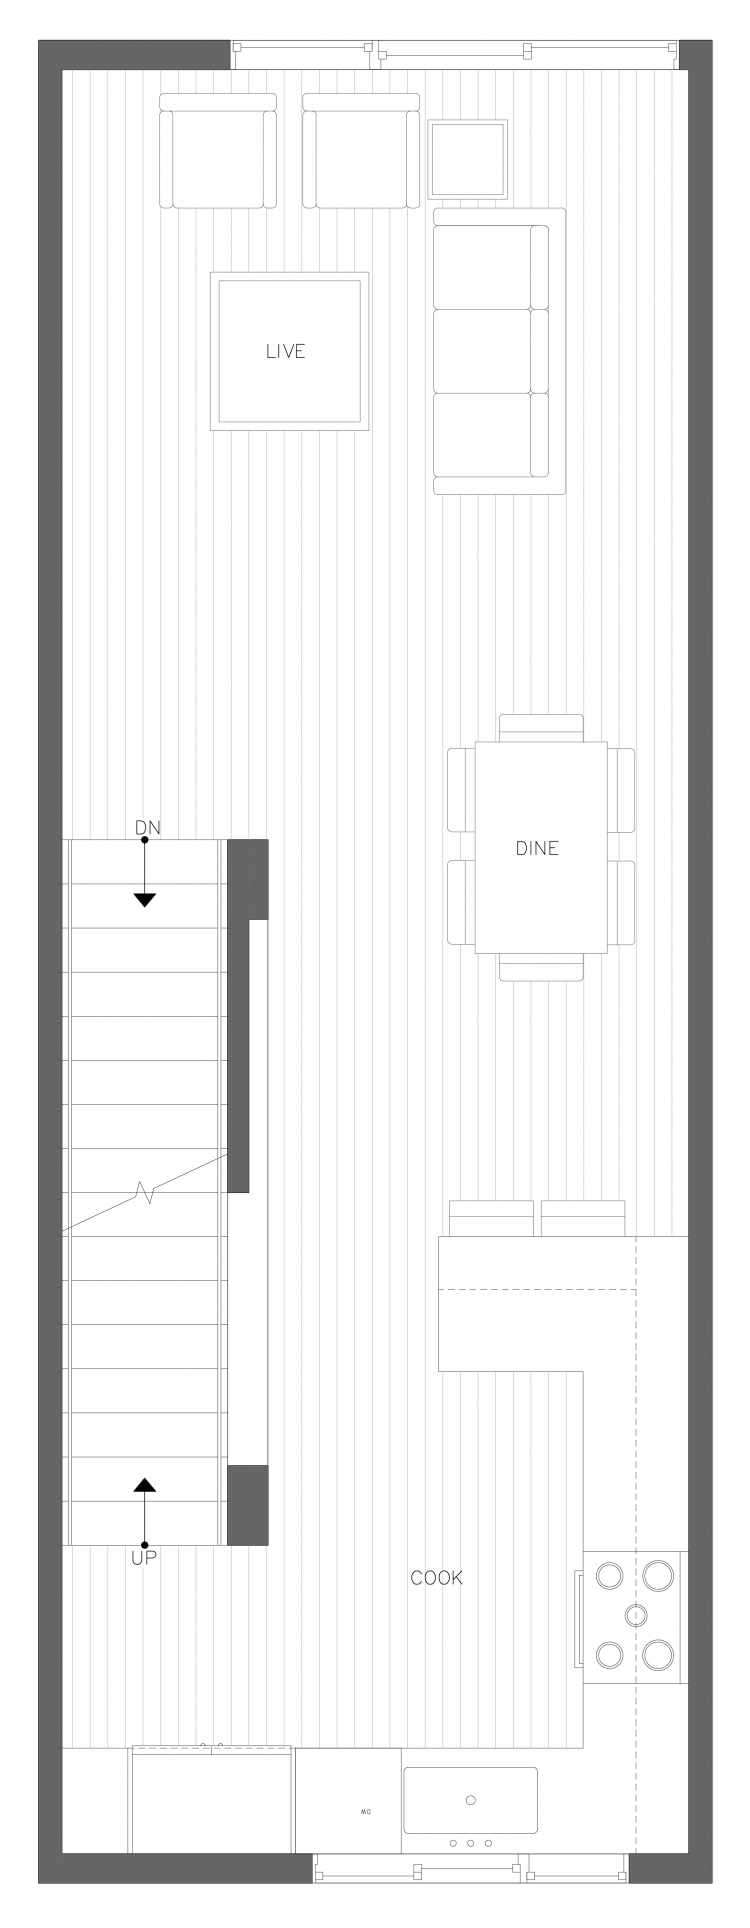 Second Floor Plan of 3406C 15th Ave W, One of the Arlo Townhomes in North Queen Anne